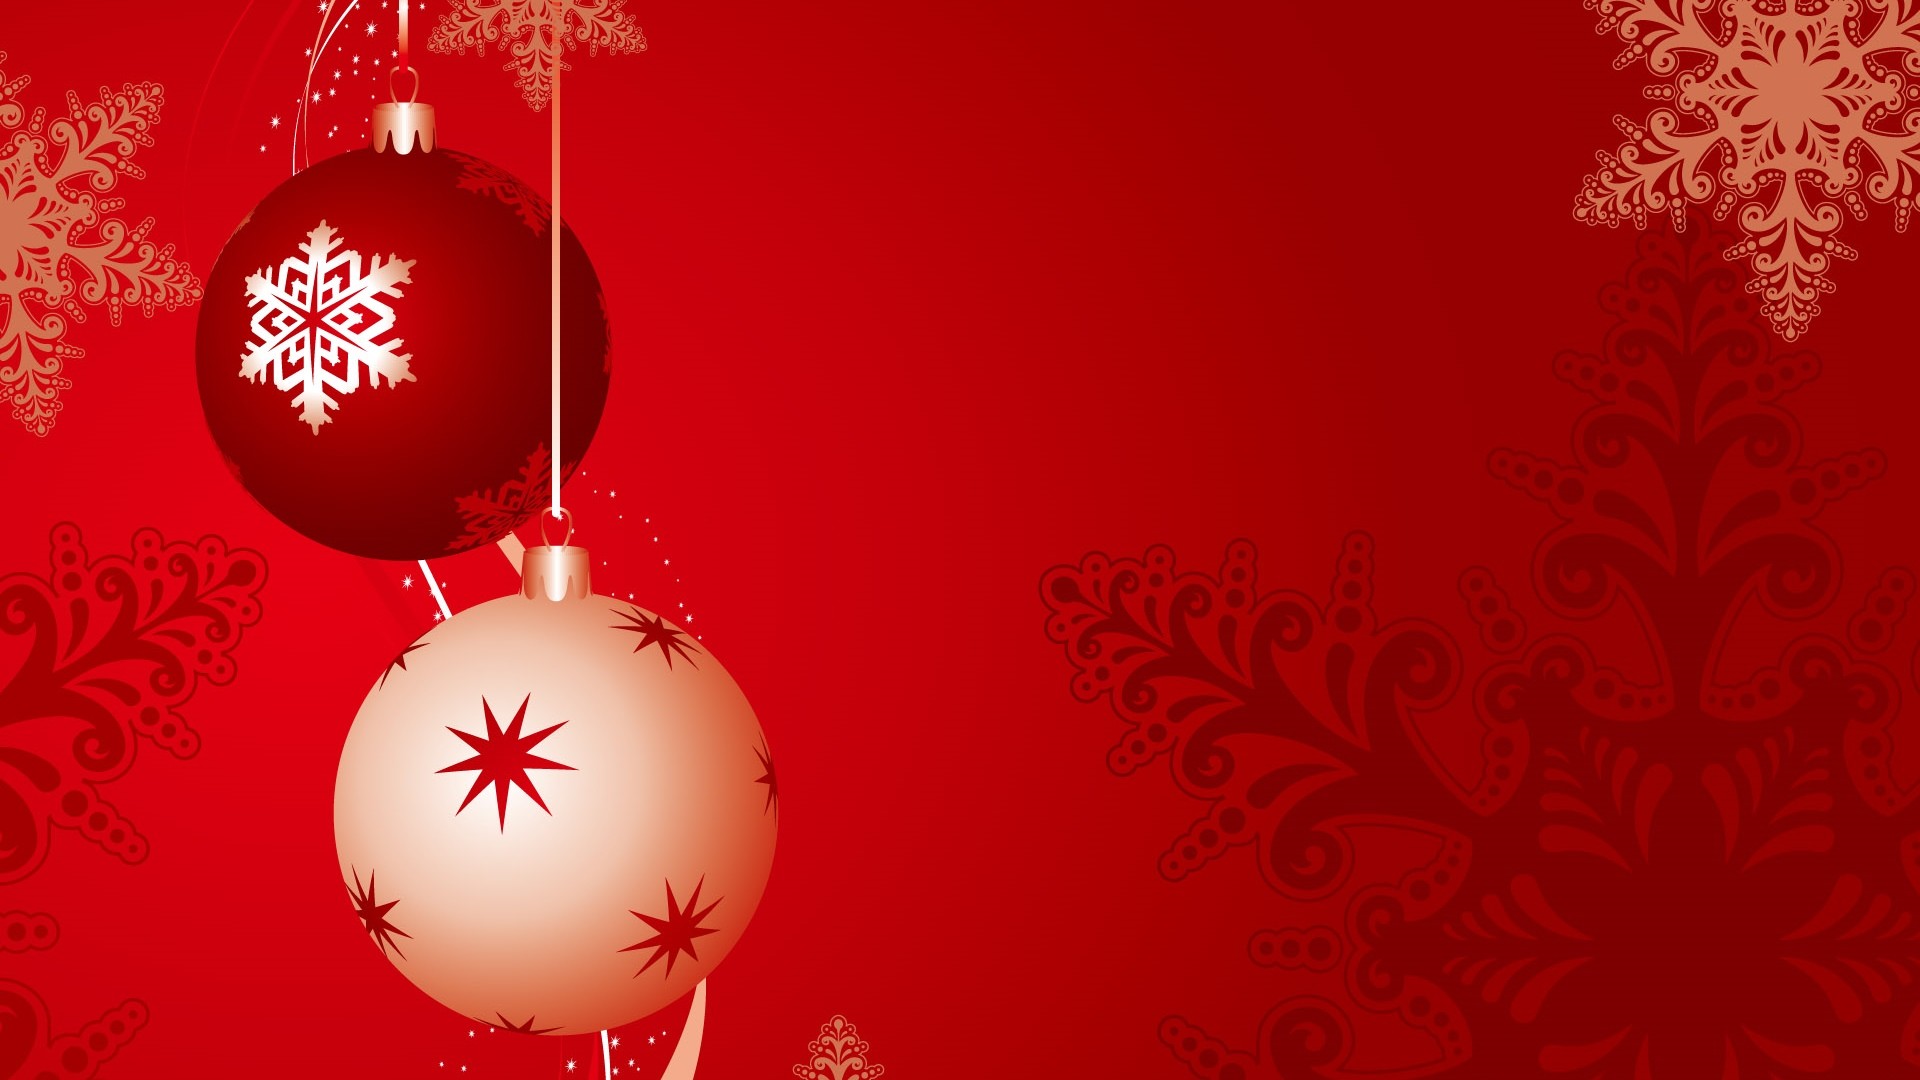 1920x1080 red-christmas-background-wallpaper-9443-hd-wallpapers1